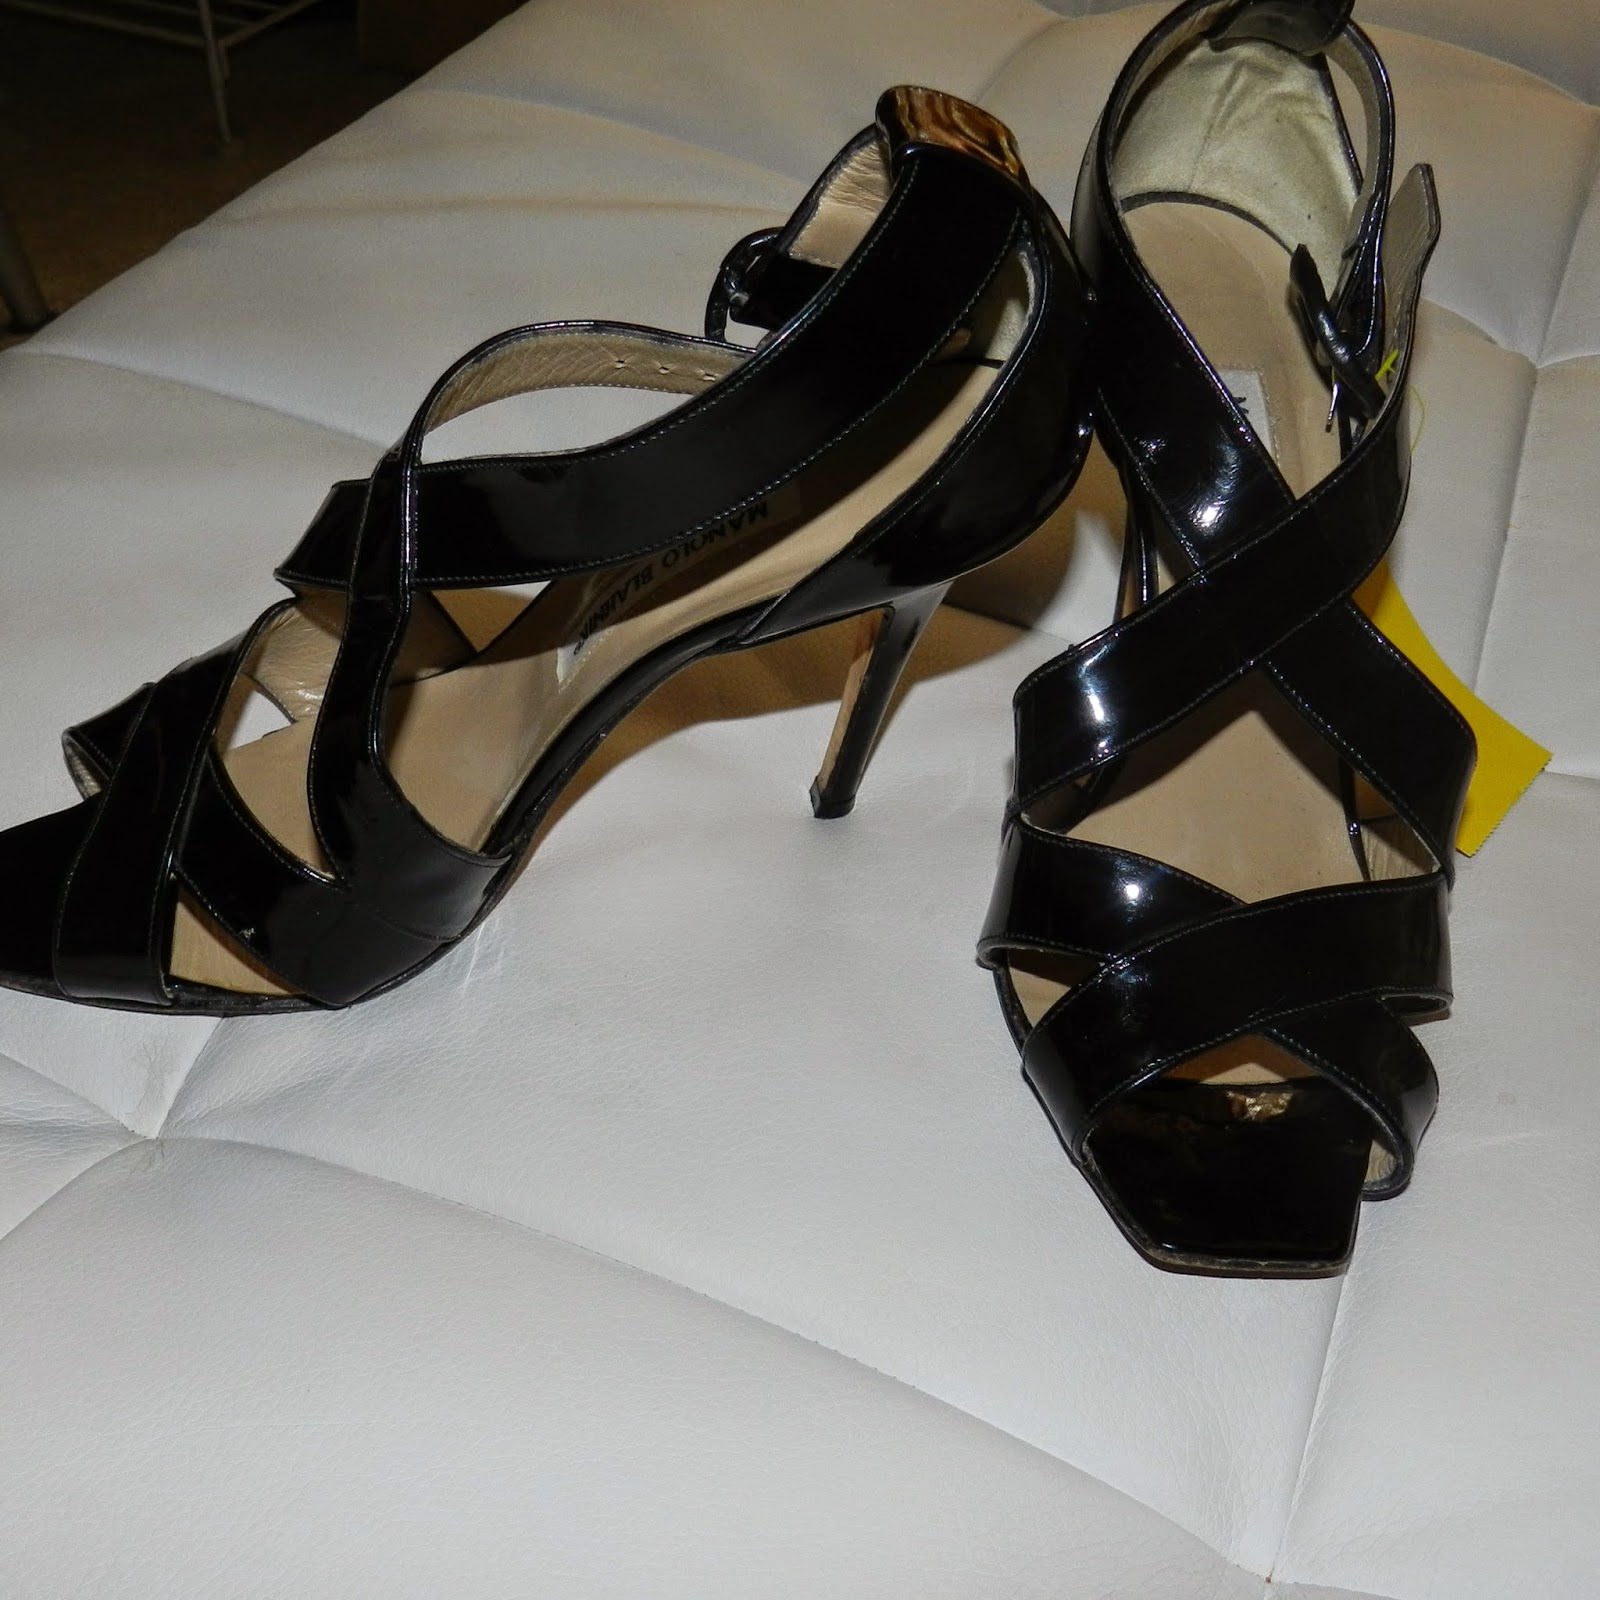 Thrift Haul Score of the Week: Manolo Blahnik Strappy Pumps | Two ...